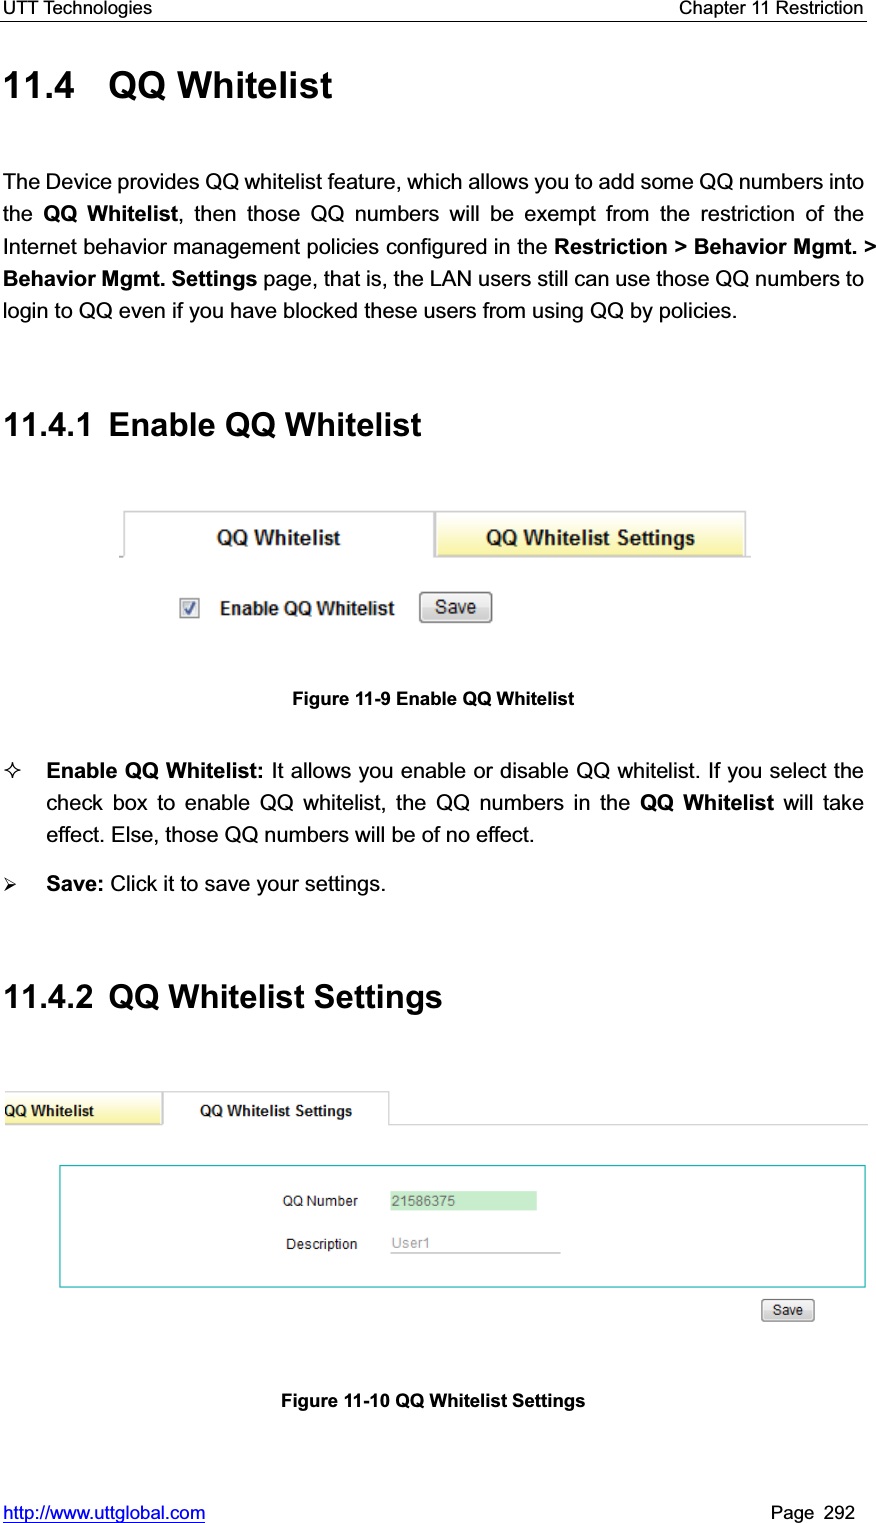 UTT Technologies    Chapter 11 Restriction   http://www.uttglobal.com Page 292 11.4 QQ Whitelist The Device provides QQ whitelist feature, which allows you to add some QQ numbers into the  QQ Whitelist, then those QQ numbers will be exempt from the restriction of the Internet behavior management policies configured in the Restriction &gt; Behavior Mgmt. &gt; Behavior Mgmt. Settings page, that is, the LAN users still can use those QQ numbers to login to QQ even if you have blocked these users from using QQ by policies. 11.4.1 Enable QQ Whitelist Figure 11-9 Enable QQ Whitelist Enable QQ Whitelist: It allows you enable or disable QQ whitelist. If you select the check box to enable QQ whitelist, the QQ numbers in the QQ Whitelist will take effect. Else, those QQ numbers will be of no effect.   ¾Save: Click it to save your settings.11.4.2  QQ Whitelist Settings Figure 11-10 QQ Whitelist Settings 